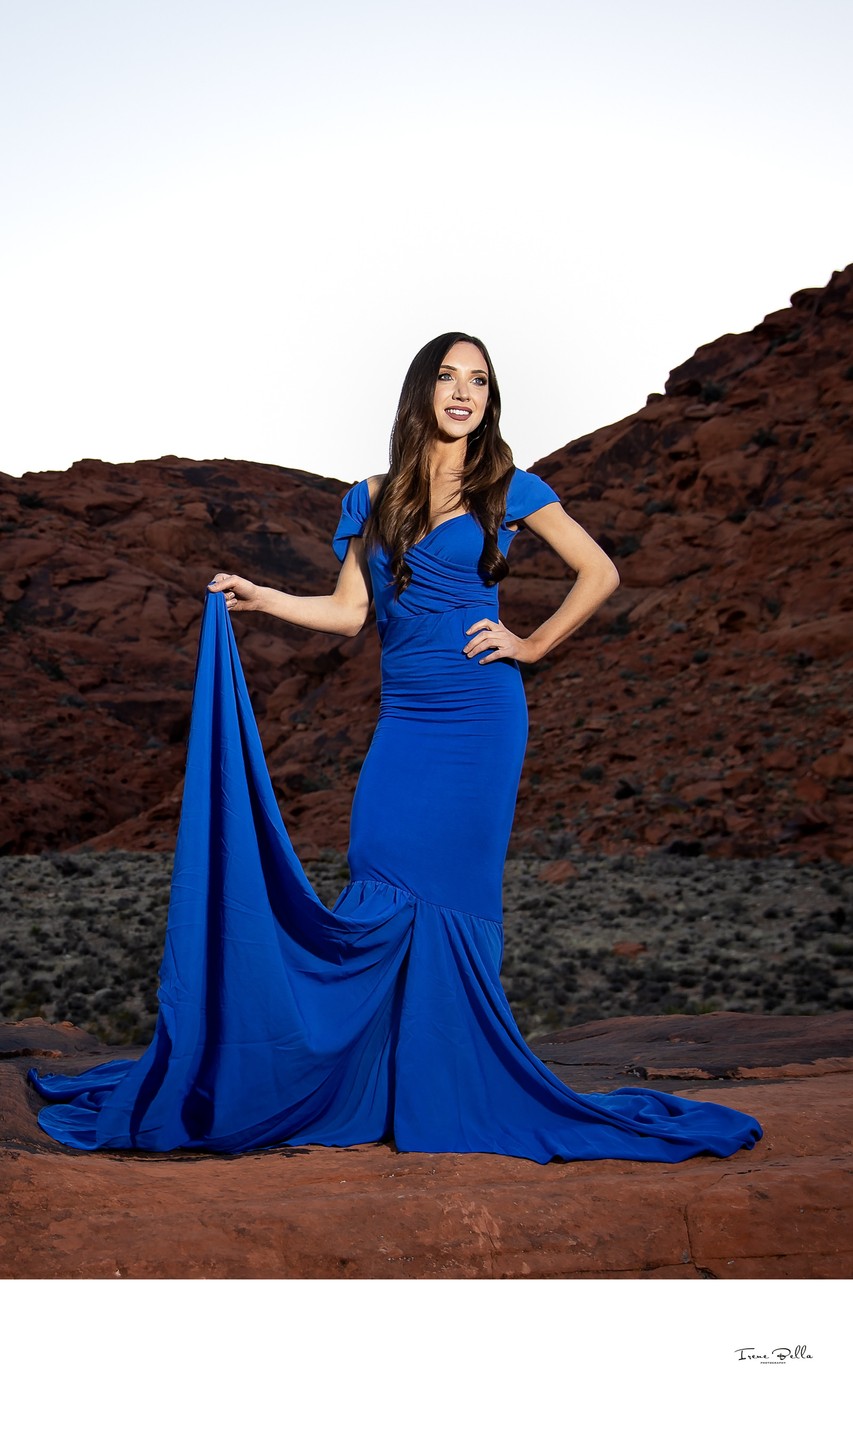 Best Red Rock Glamour Photographer